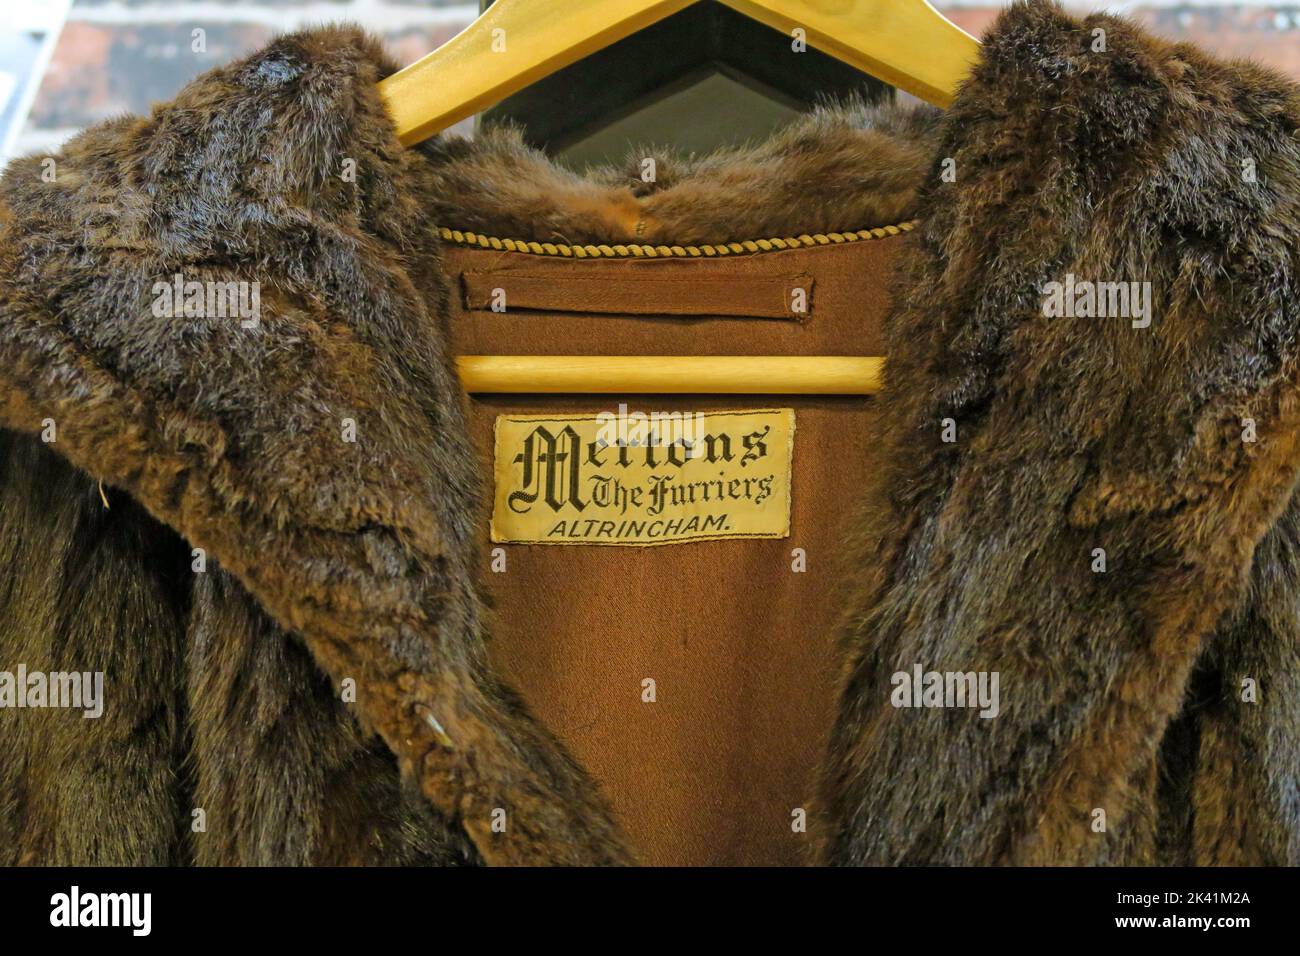 Mertons The furriers, fur coat, from Altrincham, Trafford, Greater Manchester, England, UK, Stock Photo